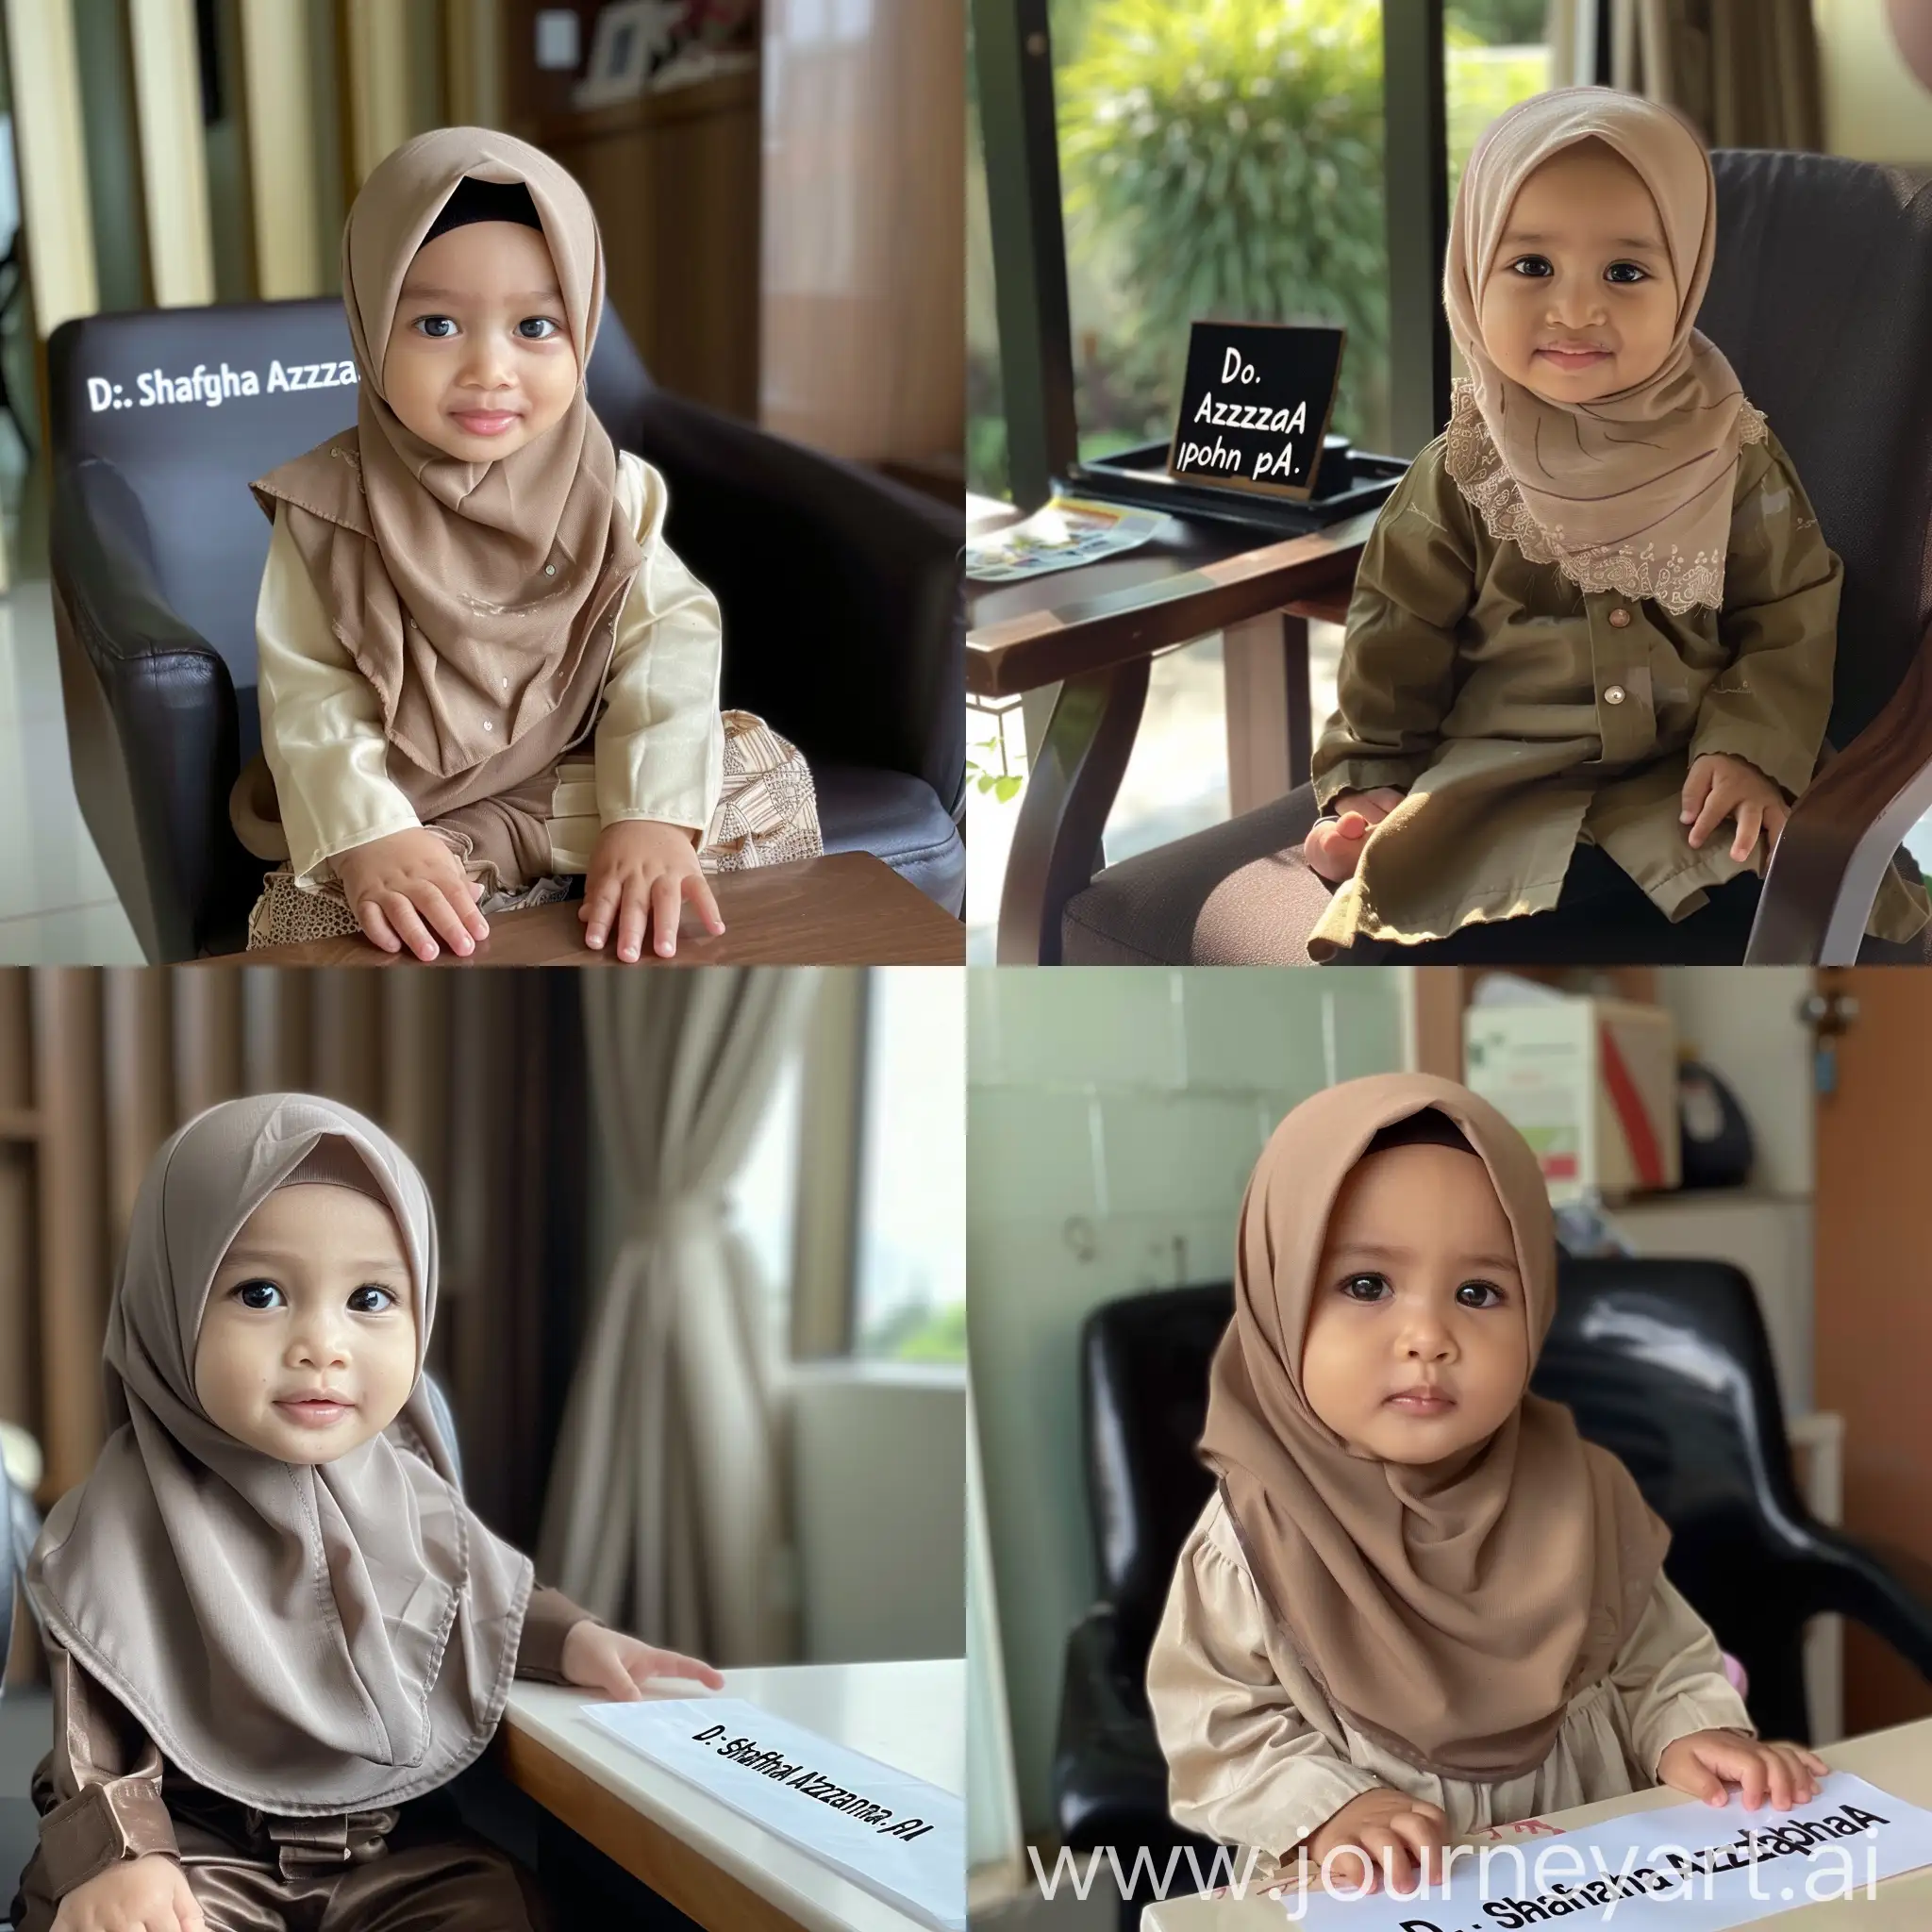 a small Indonesian child, wearing a hijab, sitting on a chair, there is a name on the table with the text "Dr. Shafwah Azzahra Pohan Sp.A"